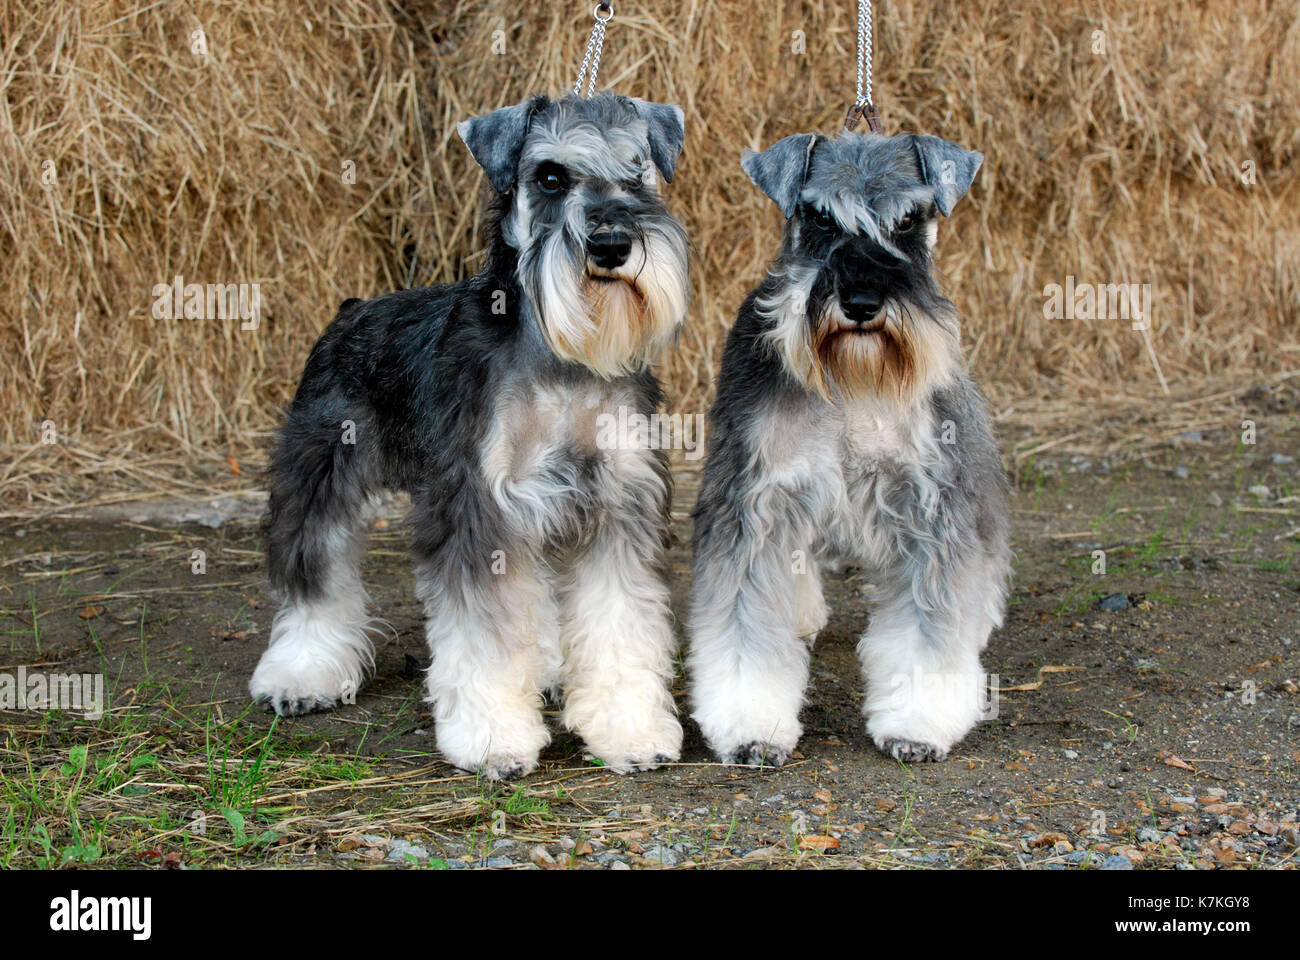 miniature schnauzer dogs on show at dog show both looking grumpy. pedigree dogs groomed and well trained ready to enter into a competition. Schnauzer. Stock Photo